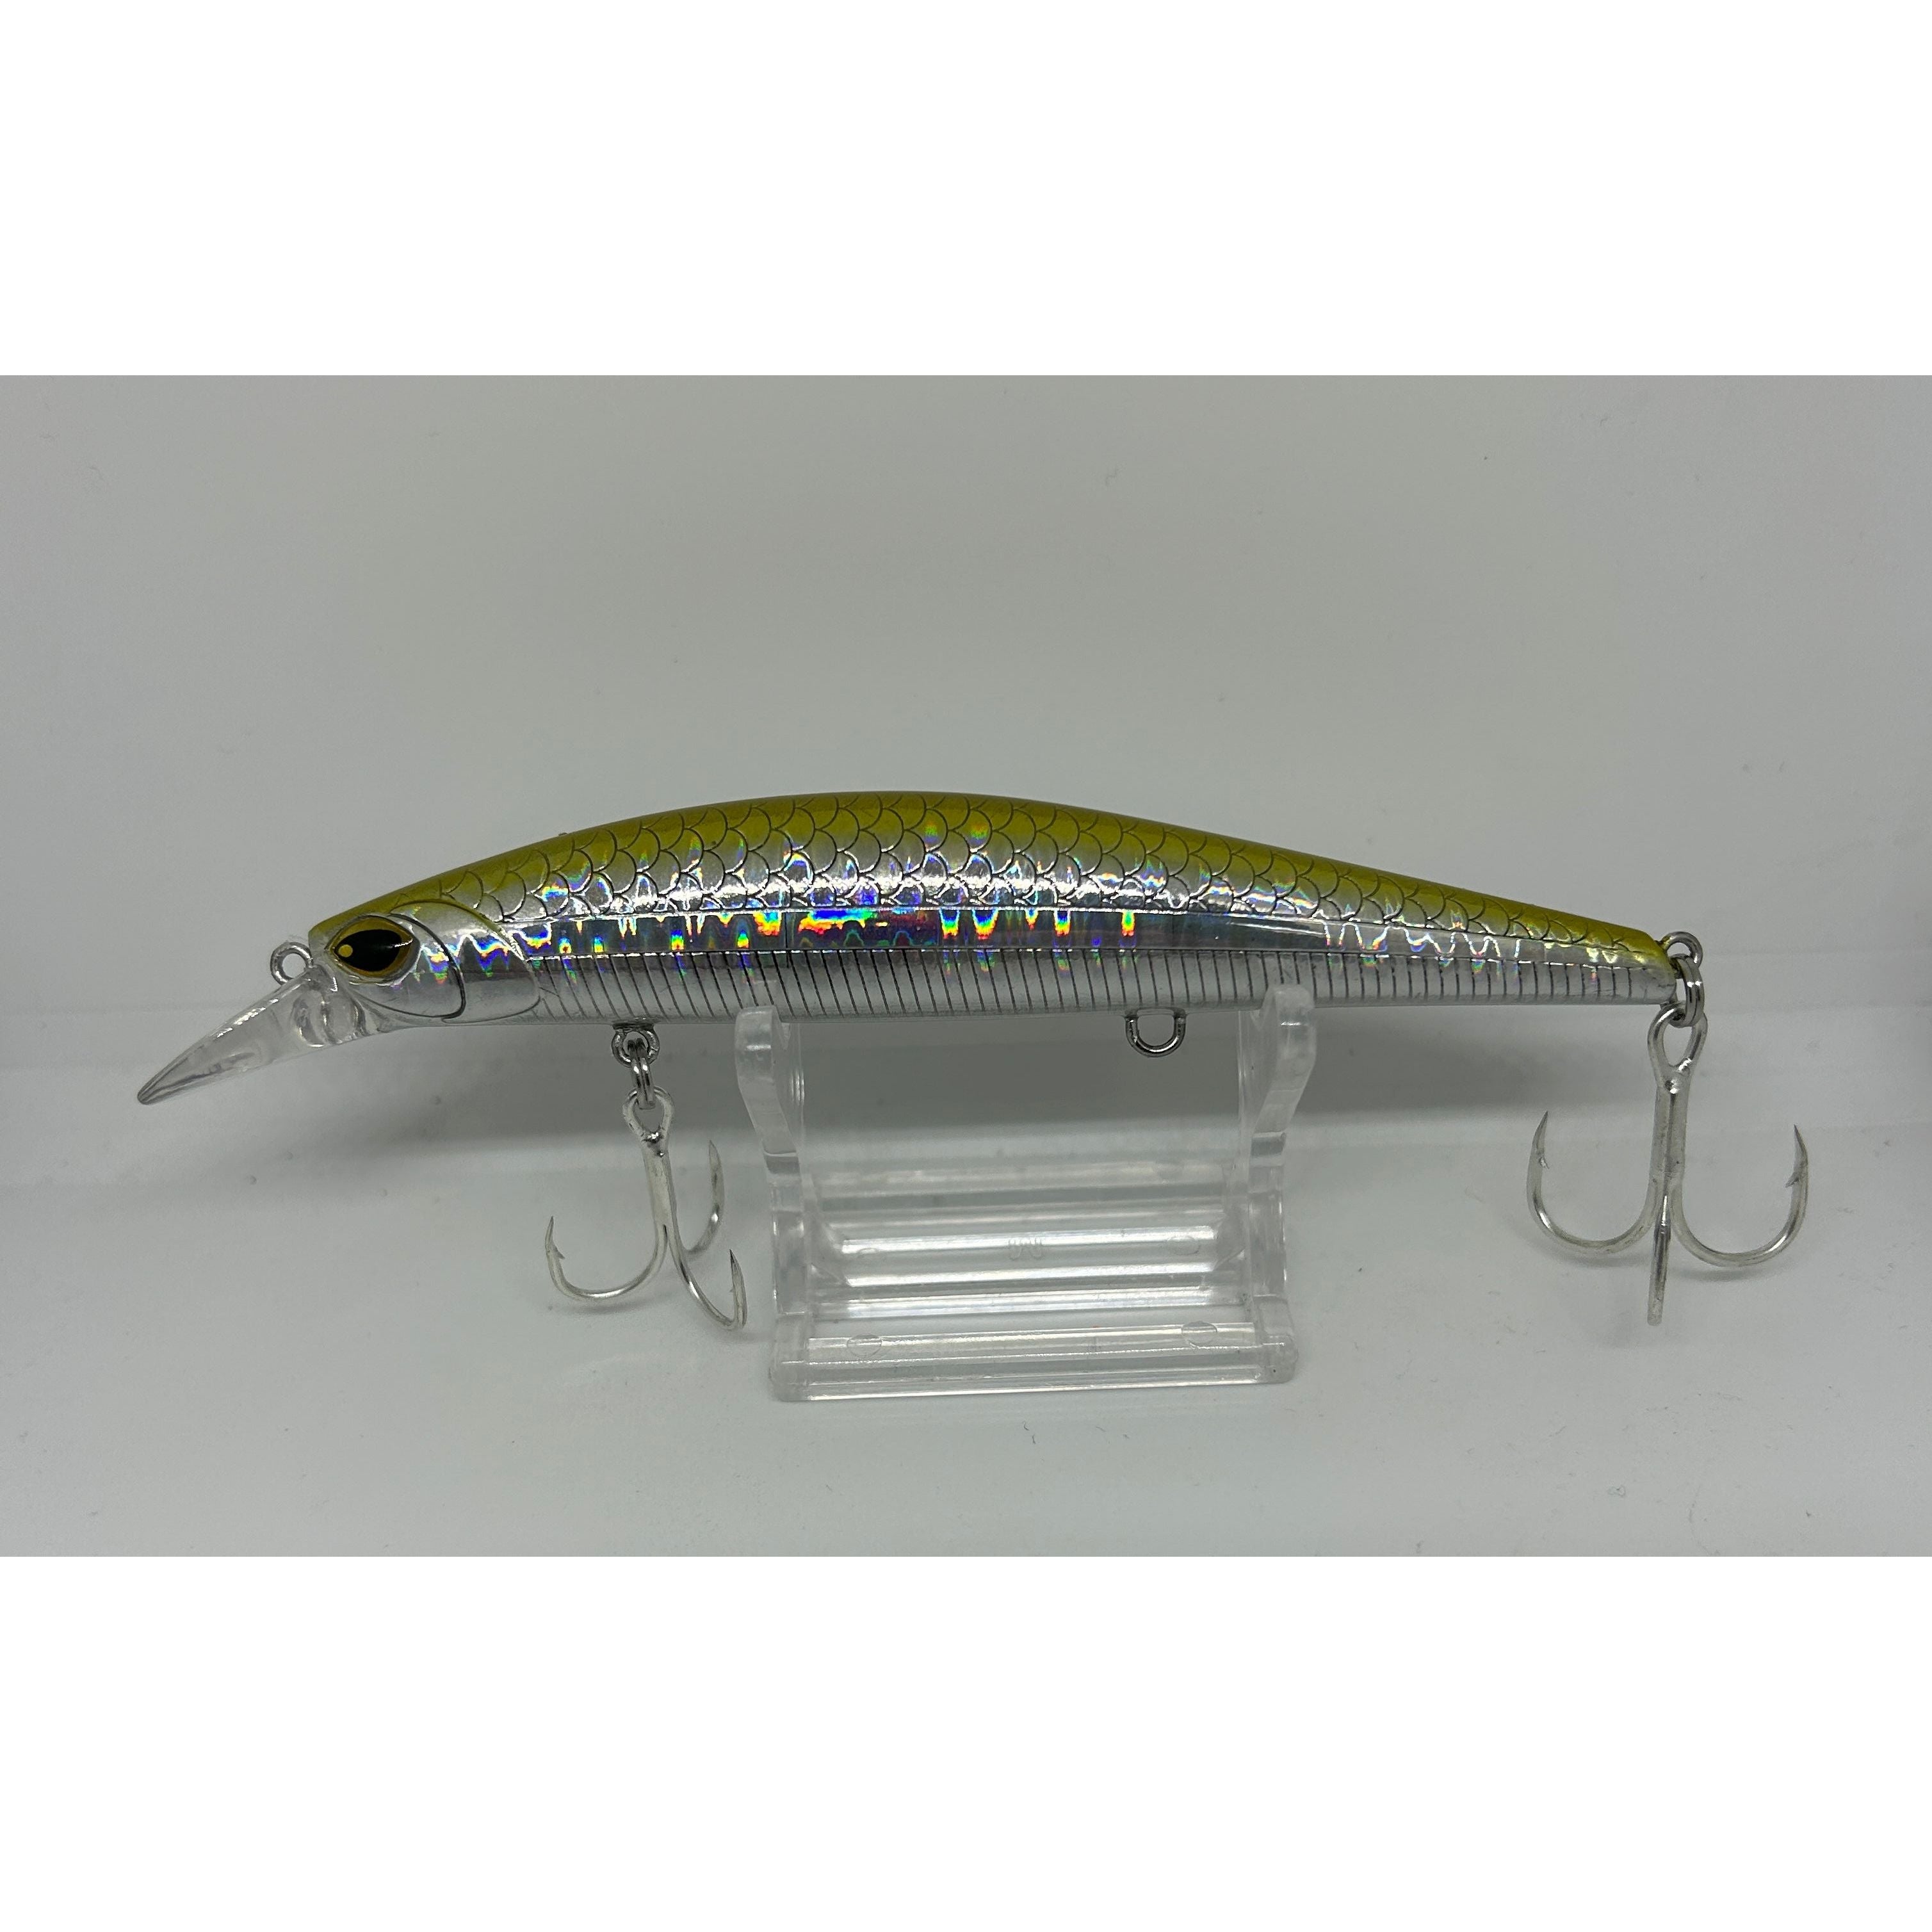 Seadra Chasin’ SW Shallow Diving Bass Lure 125mm 19g (New Release)